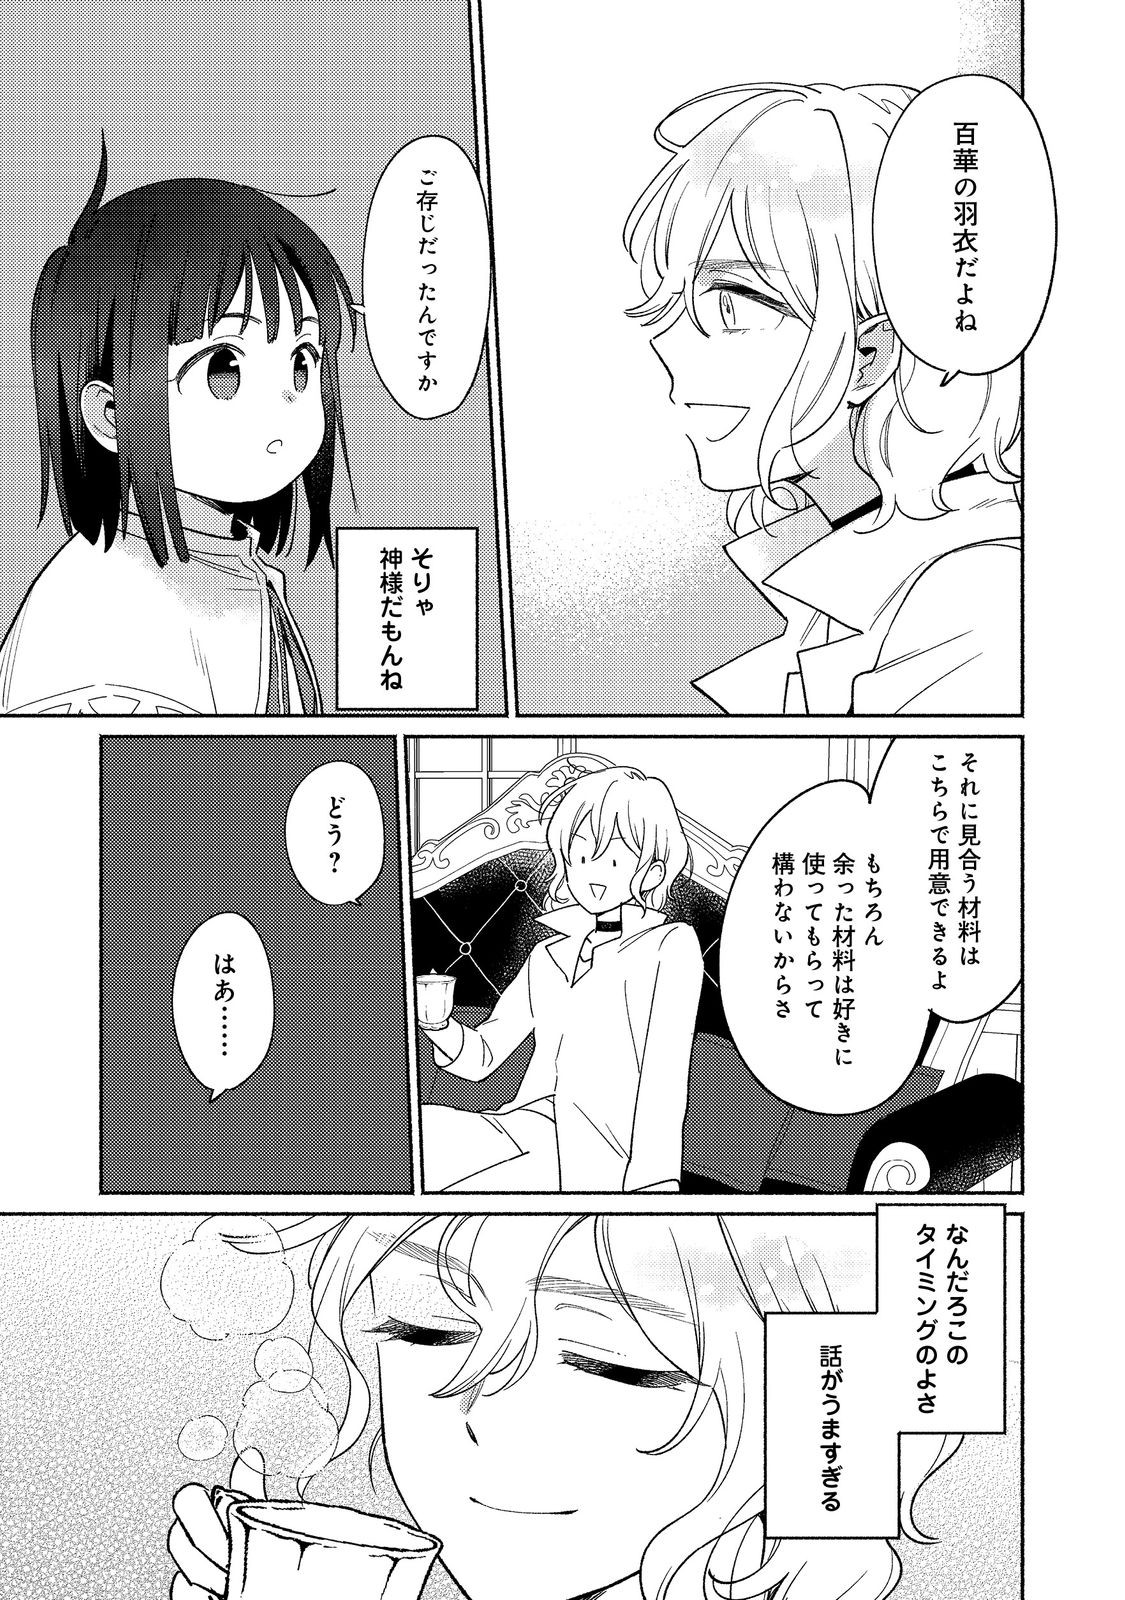 I’m the White Pig Nobleman 第19.1話 - Page 15